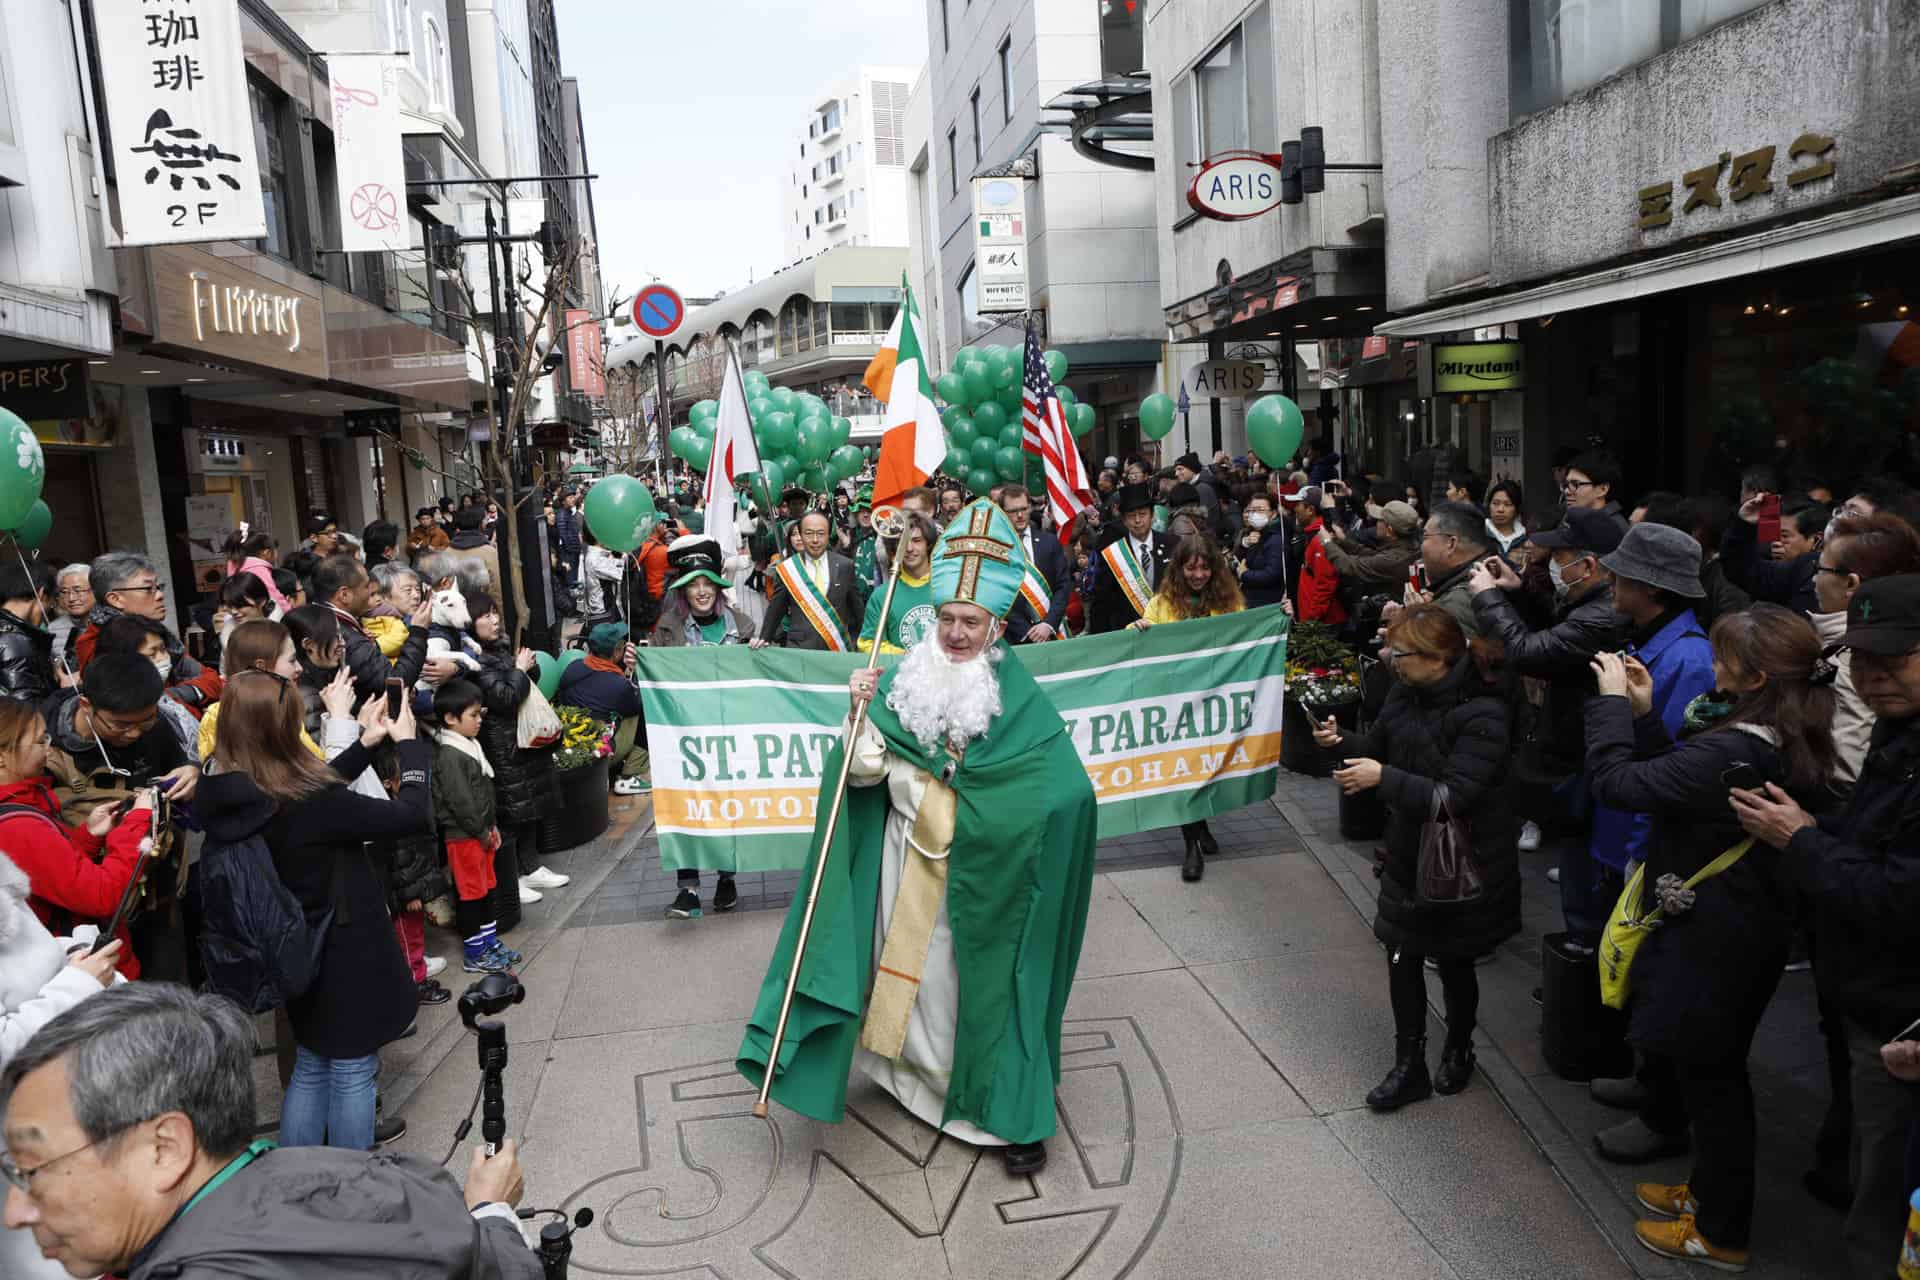 A man dressed as St. Patrick leads the parade in Japan